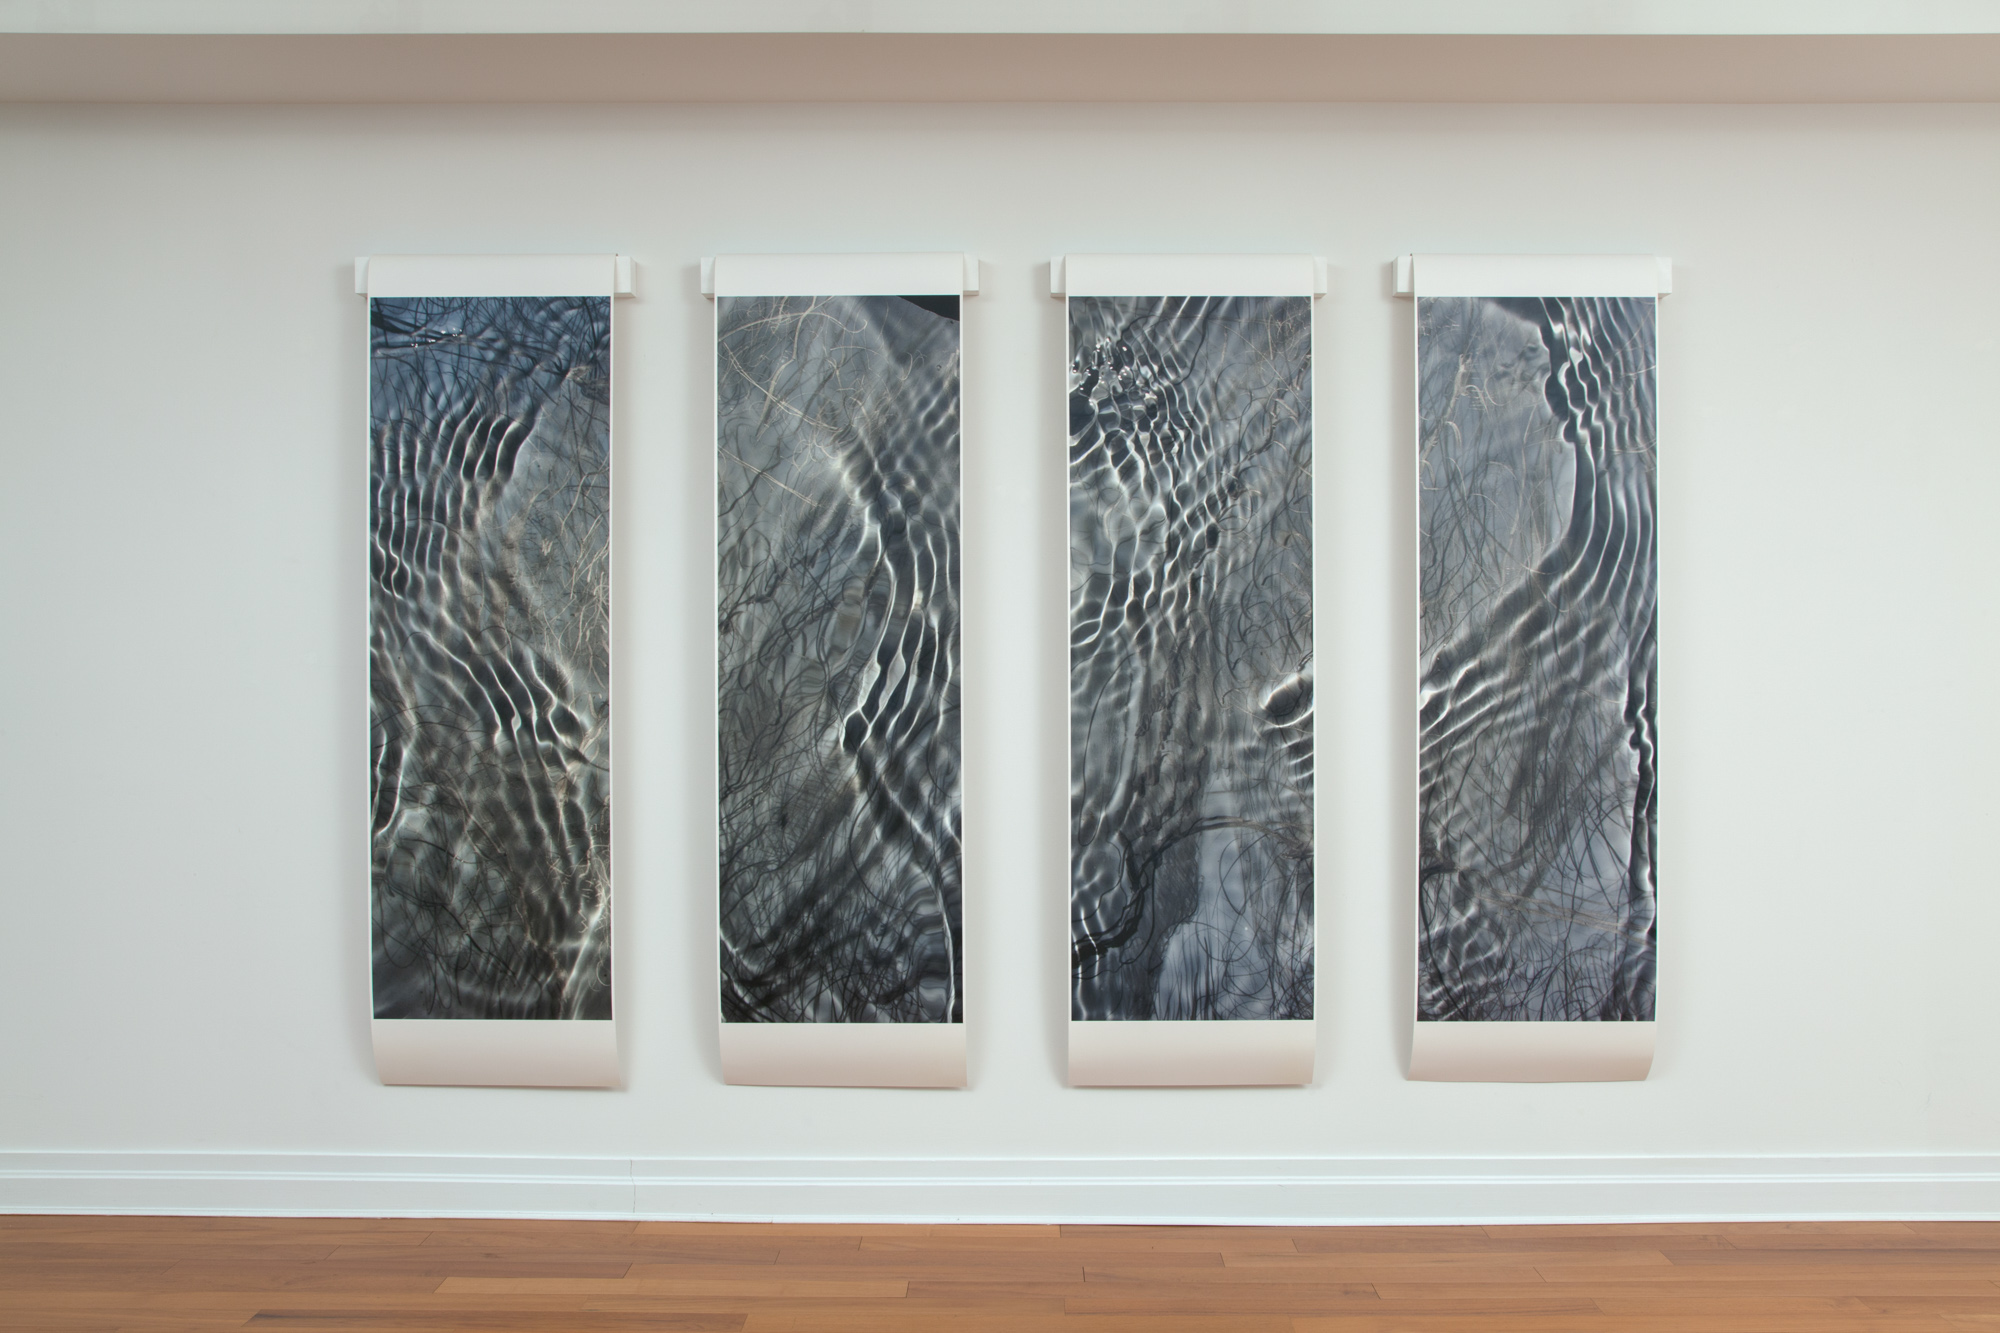 Drawn In I-IV, 2013 (Waterlines) - Installation View